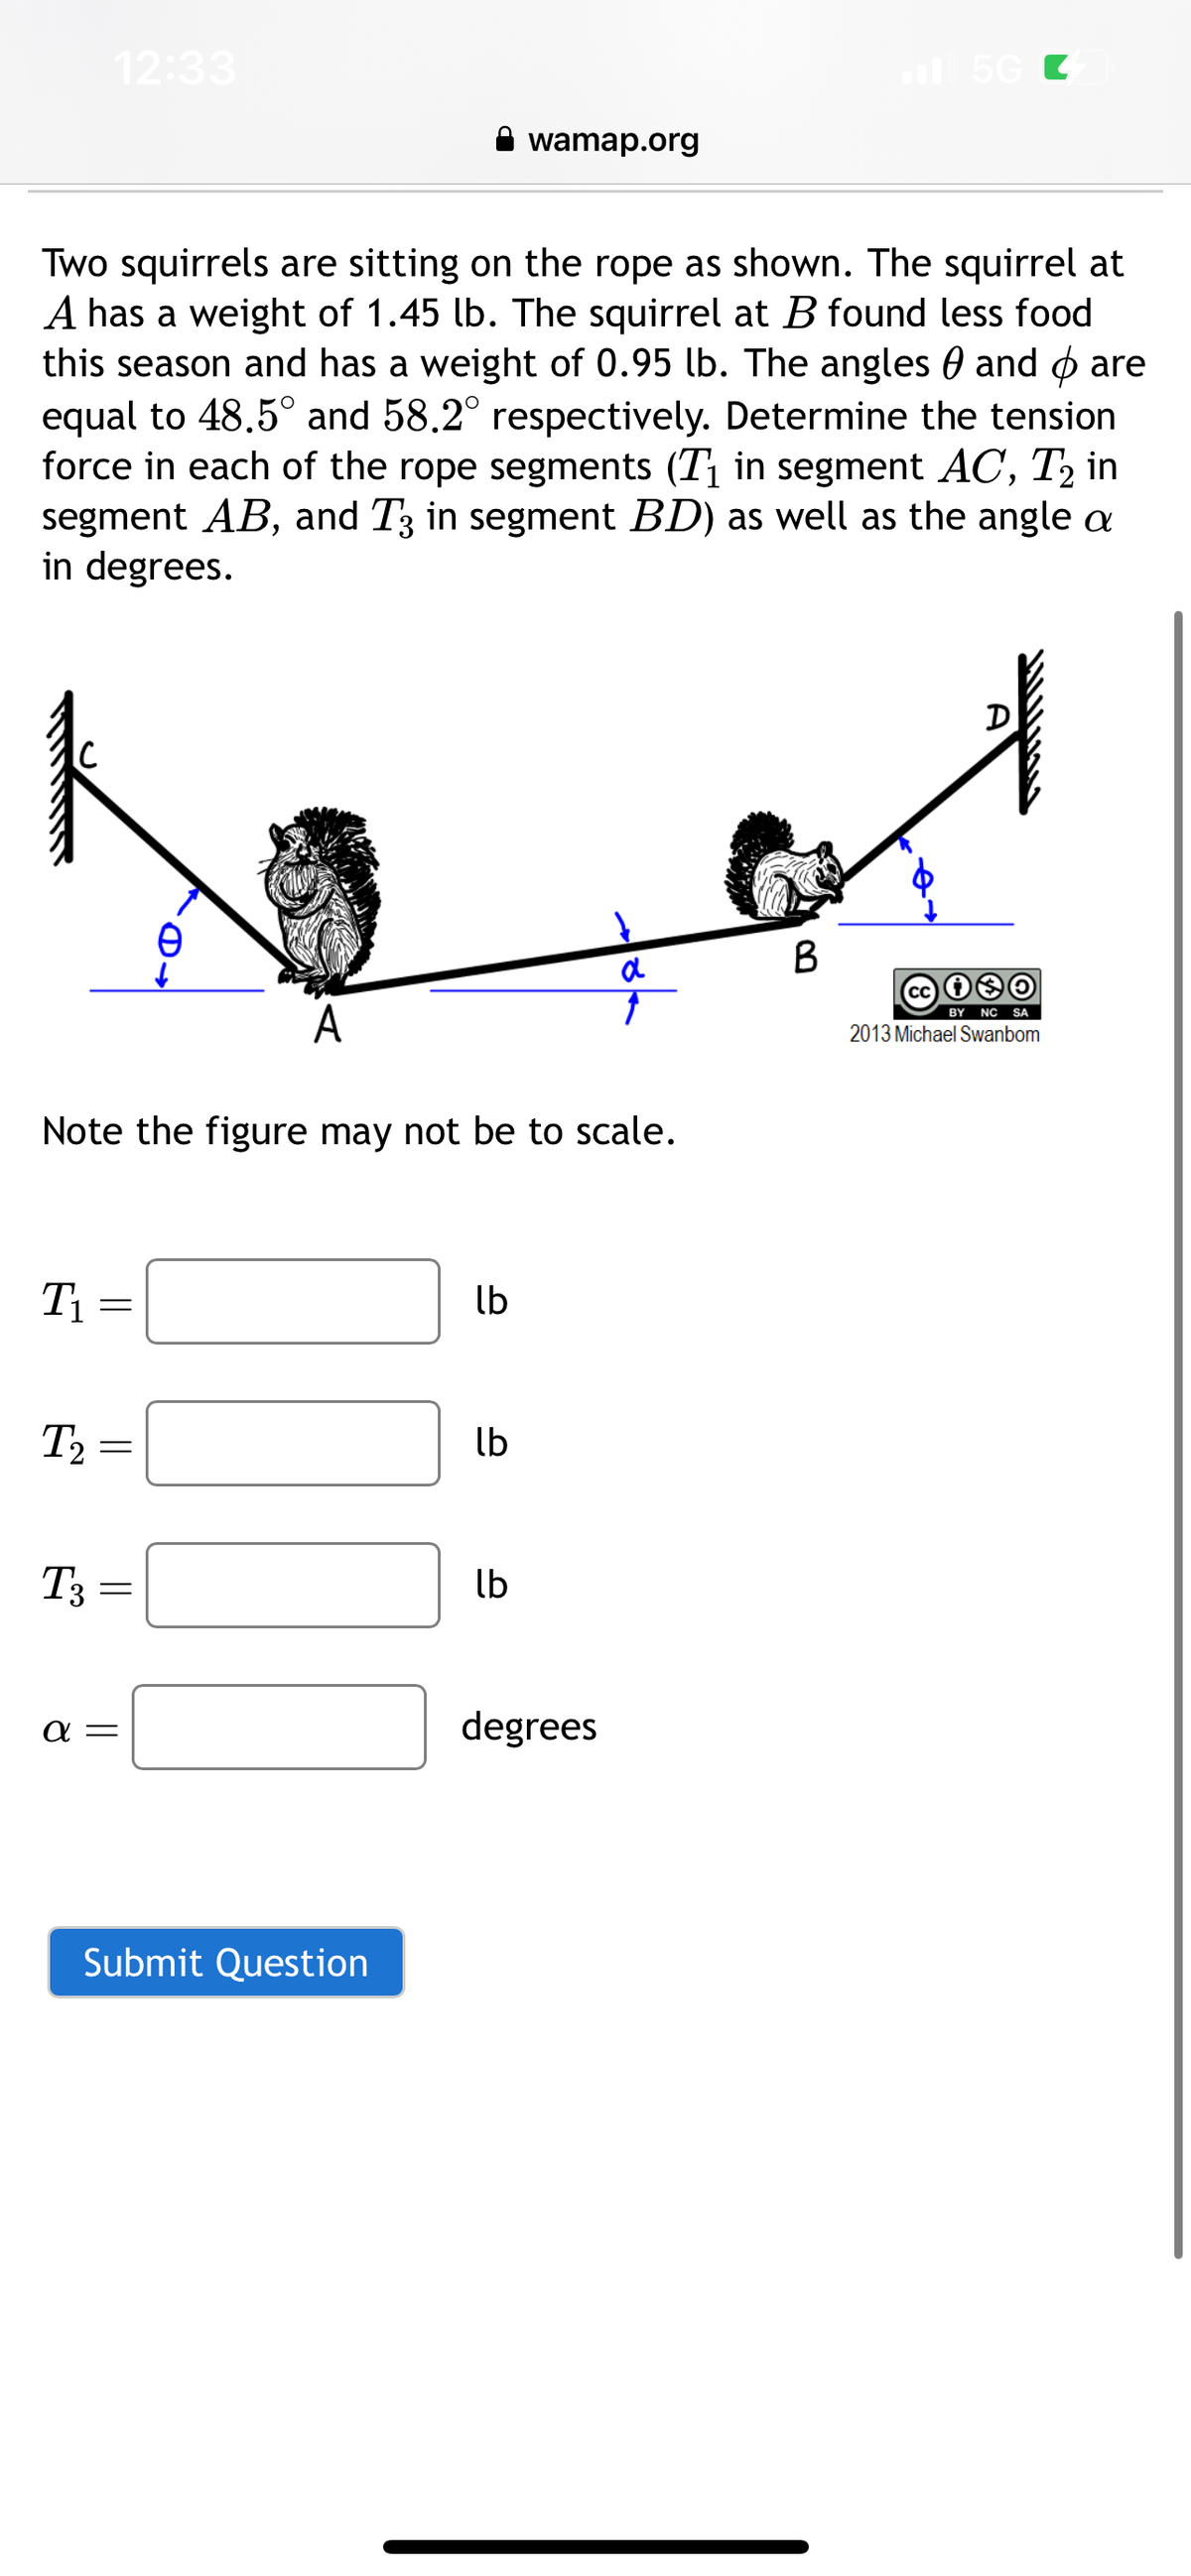 T₁
12:33
Two squirrels are sitting on the rope as shown. The squirrel at
A has a weight of 1.45 lb. The squirrel at B found less food
this season and has a weight of 0.95 lb. The angles and are
equal to 48.5° and 58.2° respectively. Determine the tension
force in each of the rope segments (T₁ in segment AC, T₂ in
segment AB, and T3 in segment BD) as well as the angle a
in degrees.
T2
T3
Note the figure may not be to scale.
=
||
=
A
a =
Submit Question
lb
wamap.org
lb
lb
a
↑
degrees
5G C
B
D
Cc
BY NC SA
2013 Michael Swanbom